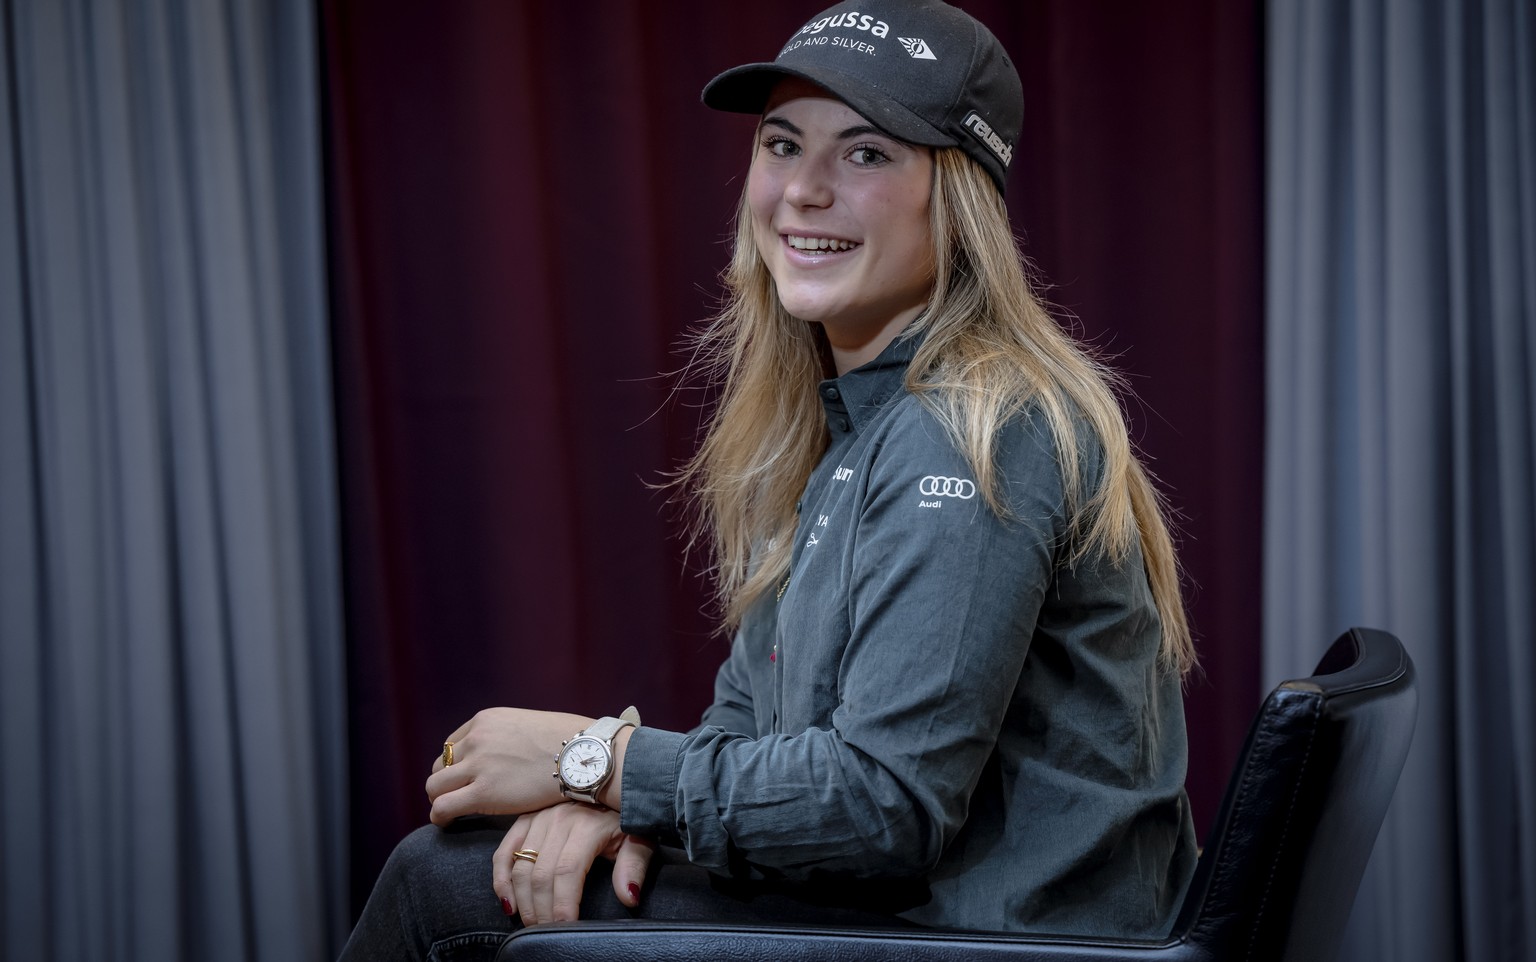 Ski racer Delia Durrer of Switzerland, poses during the Swiss-ski federation press conference at the Alpine Skiing FIS Ski World Cup, in St. Moritz, Switzerland, Wednesday, December 6, 2023. (KEYSTONE ...